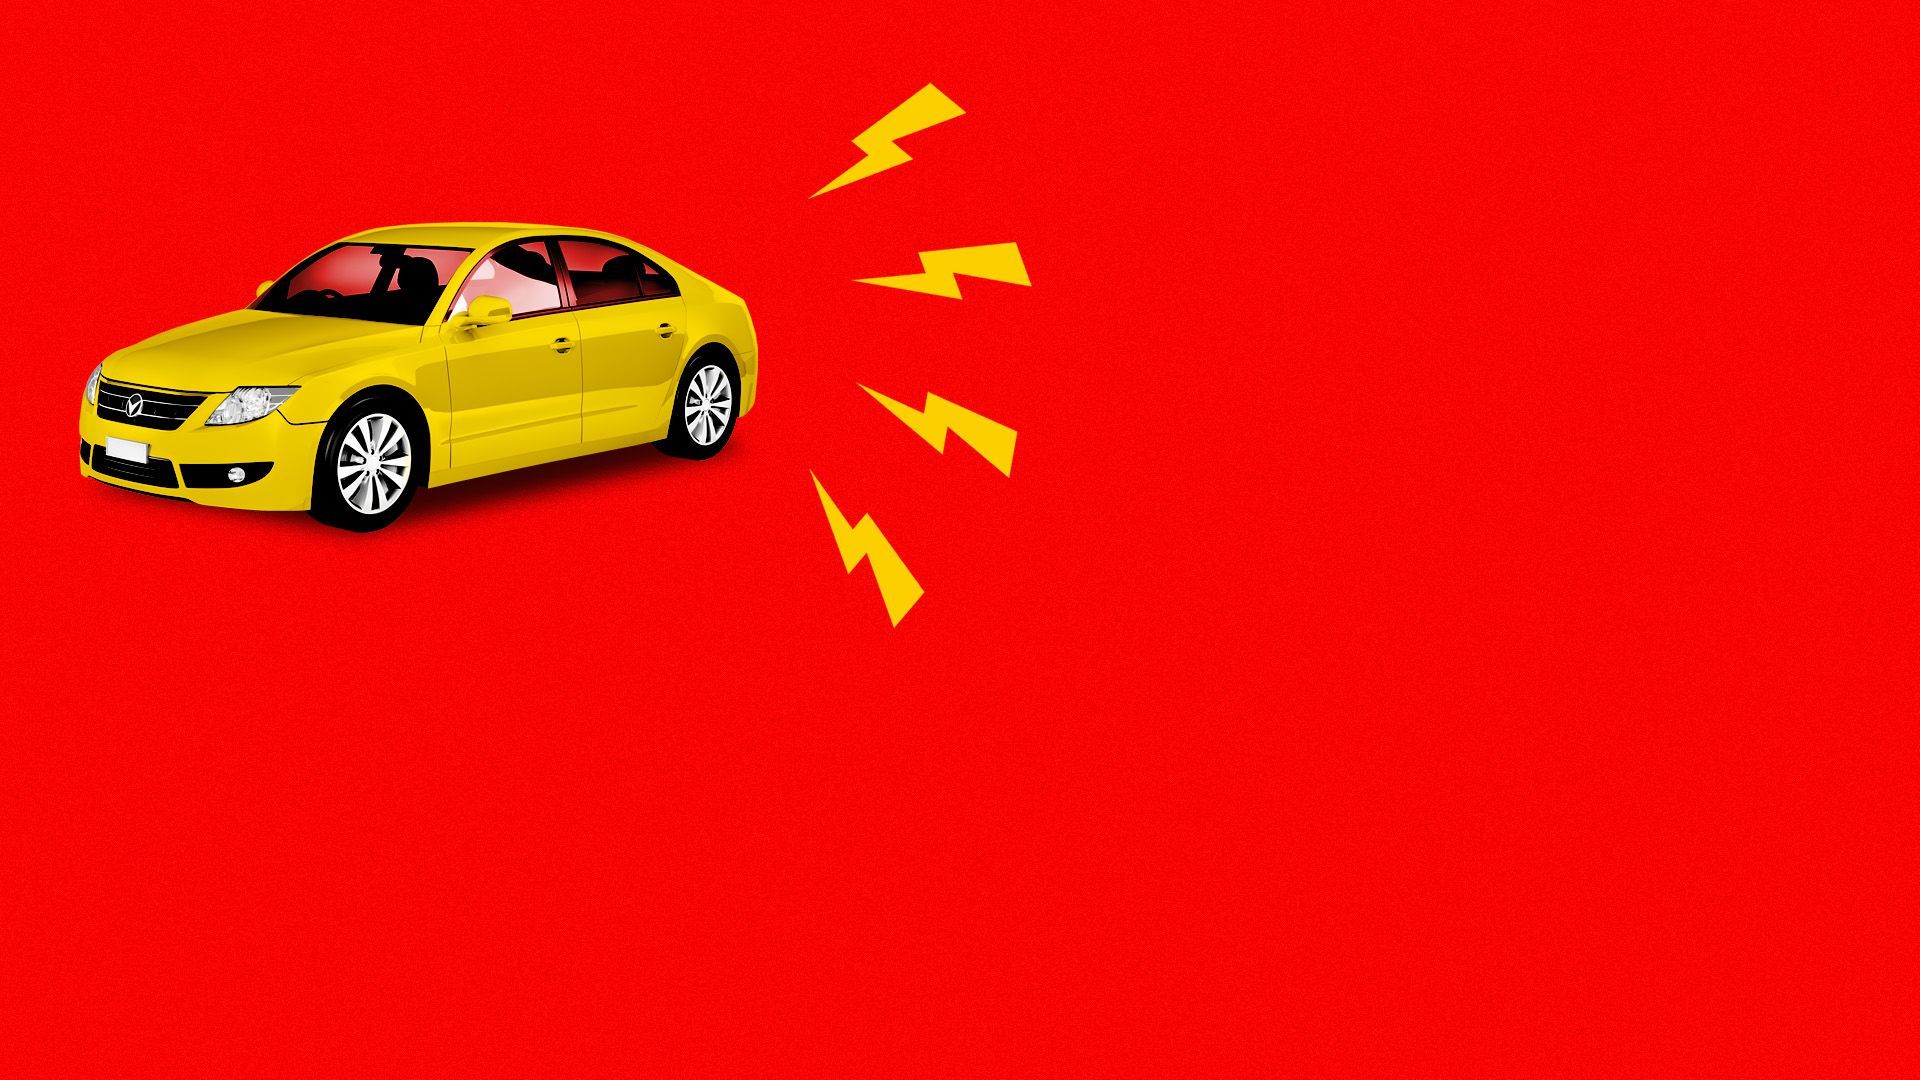 Illustration of a yellow car with lightning bolt icons surrounding it in the shape of the flag of China